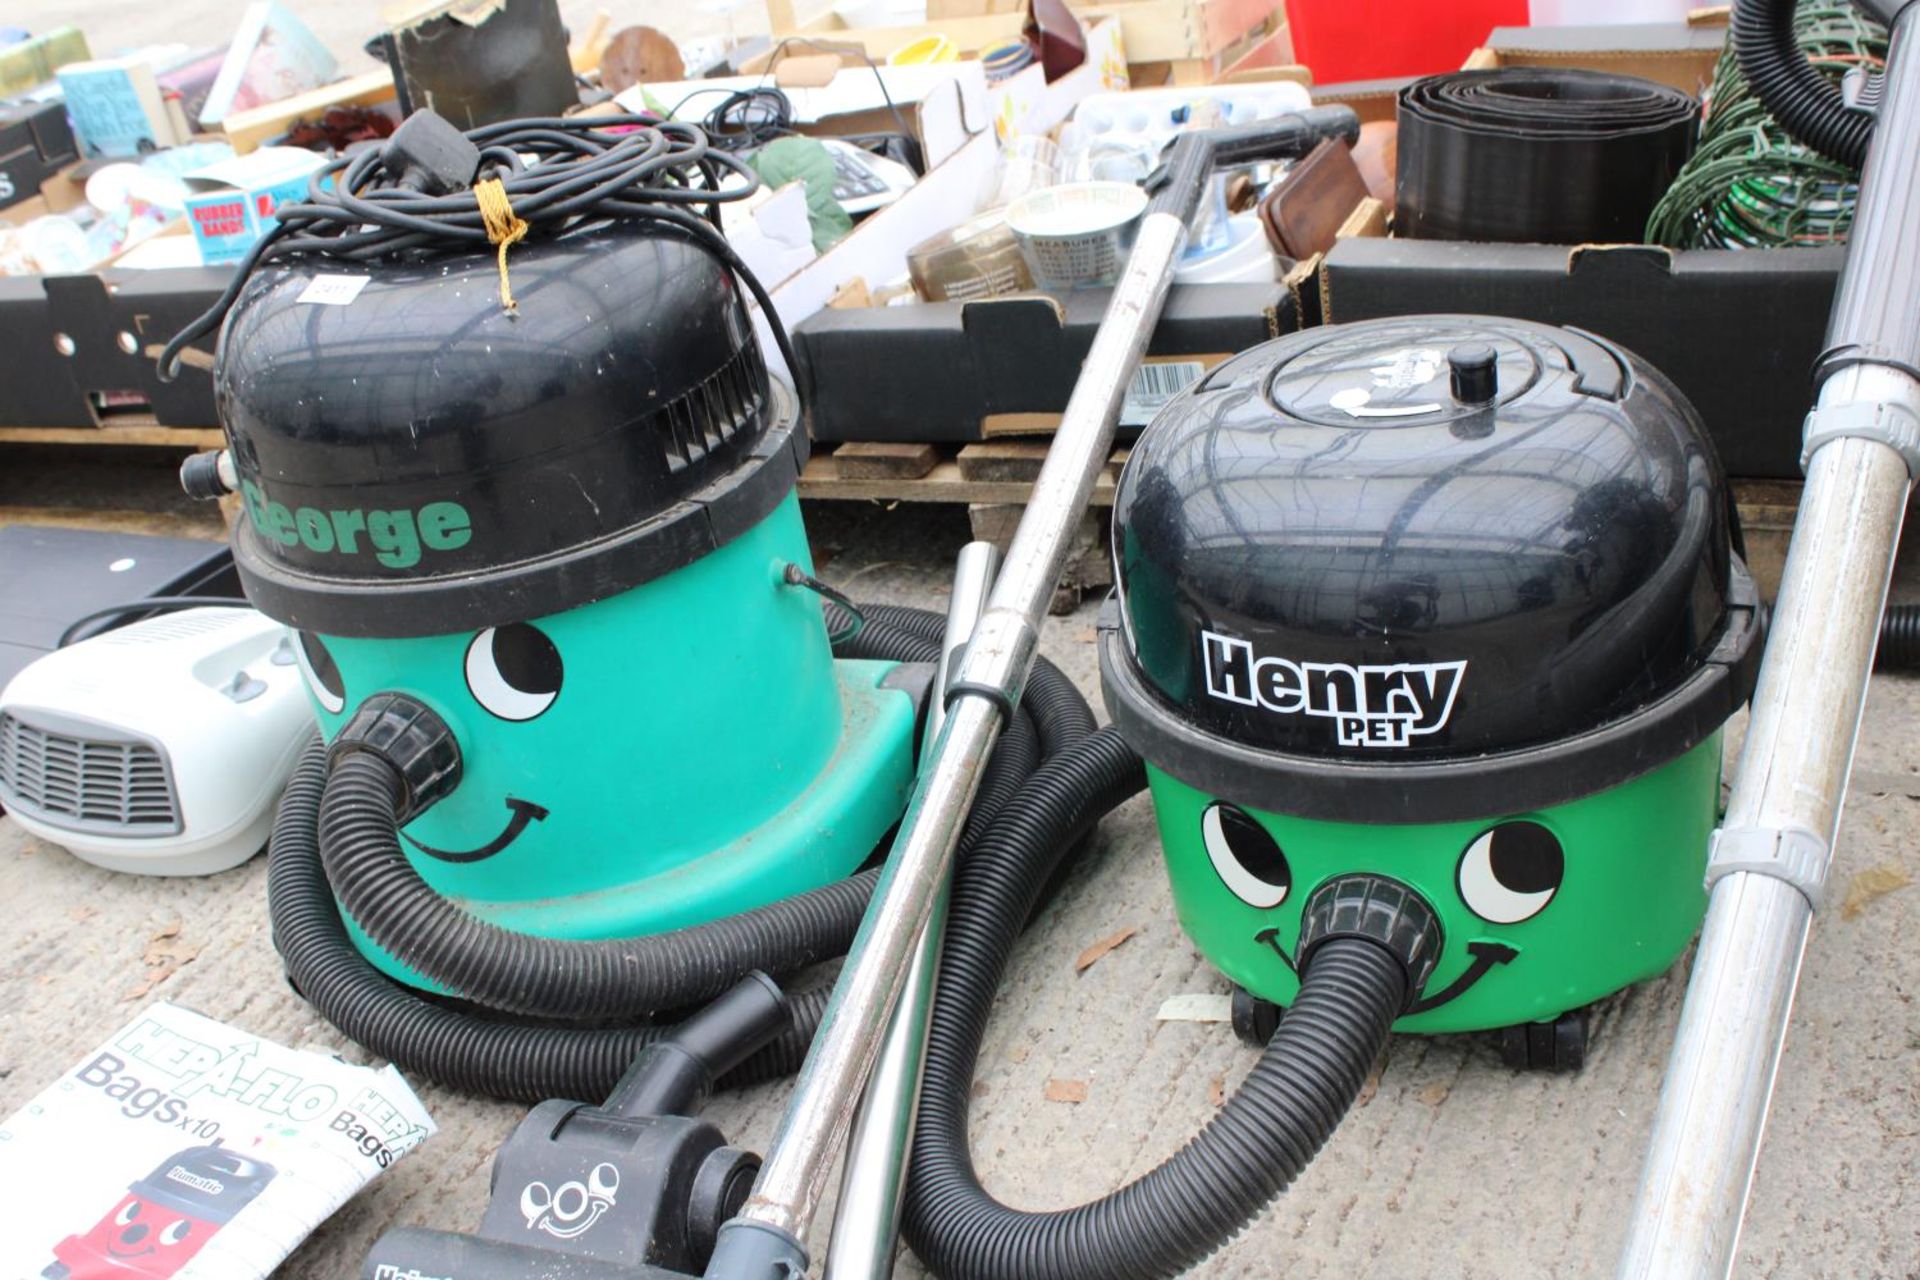 A HENRY PET VACUUM AND A FURTHER GEORGE VACUUM CLEANER - Bild 3 aus 3